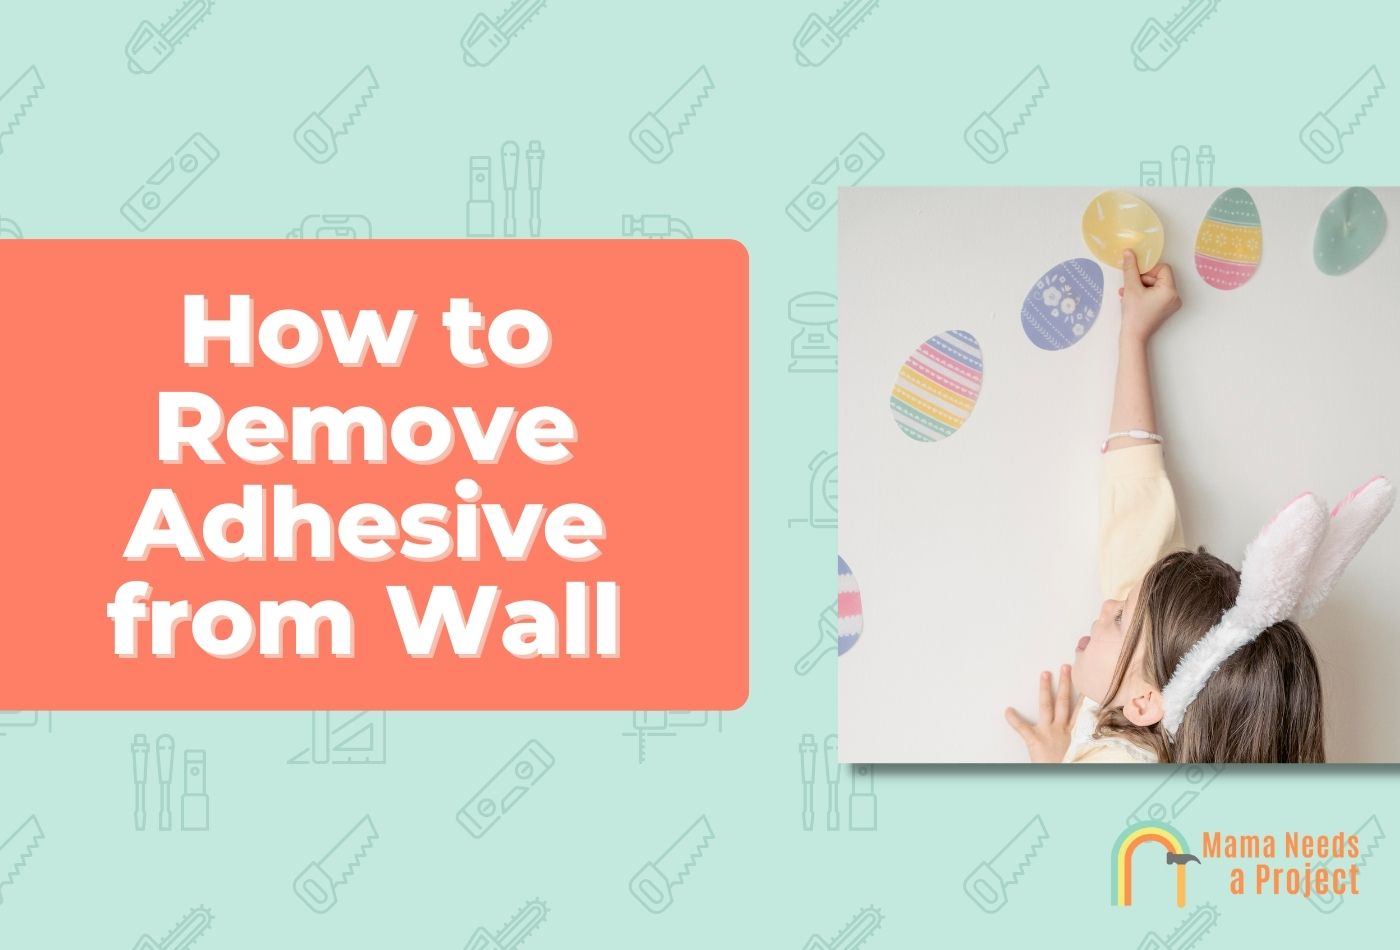 How to Remove Adhesive from Wall